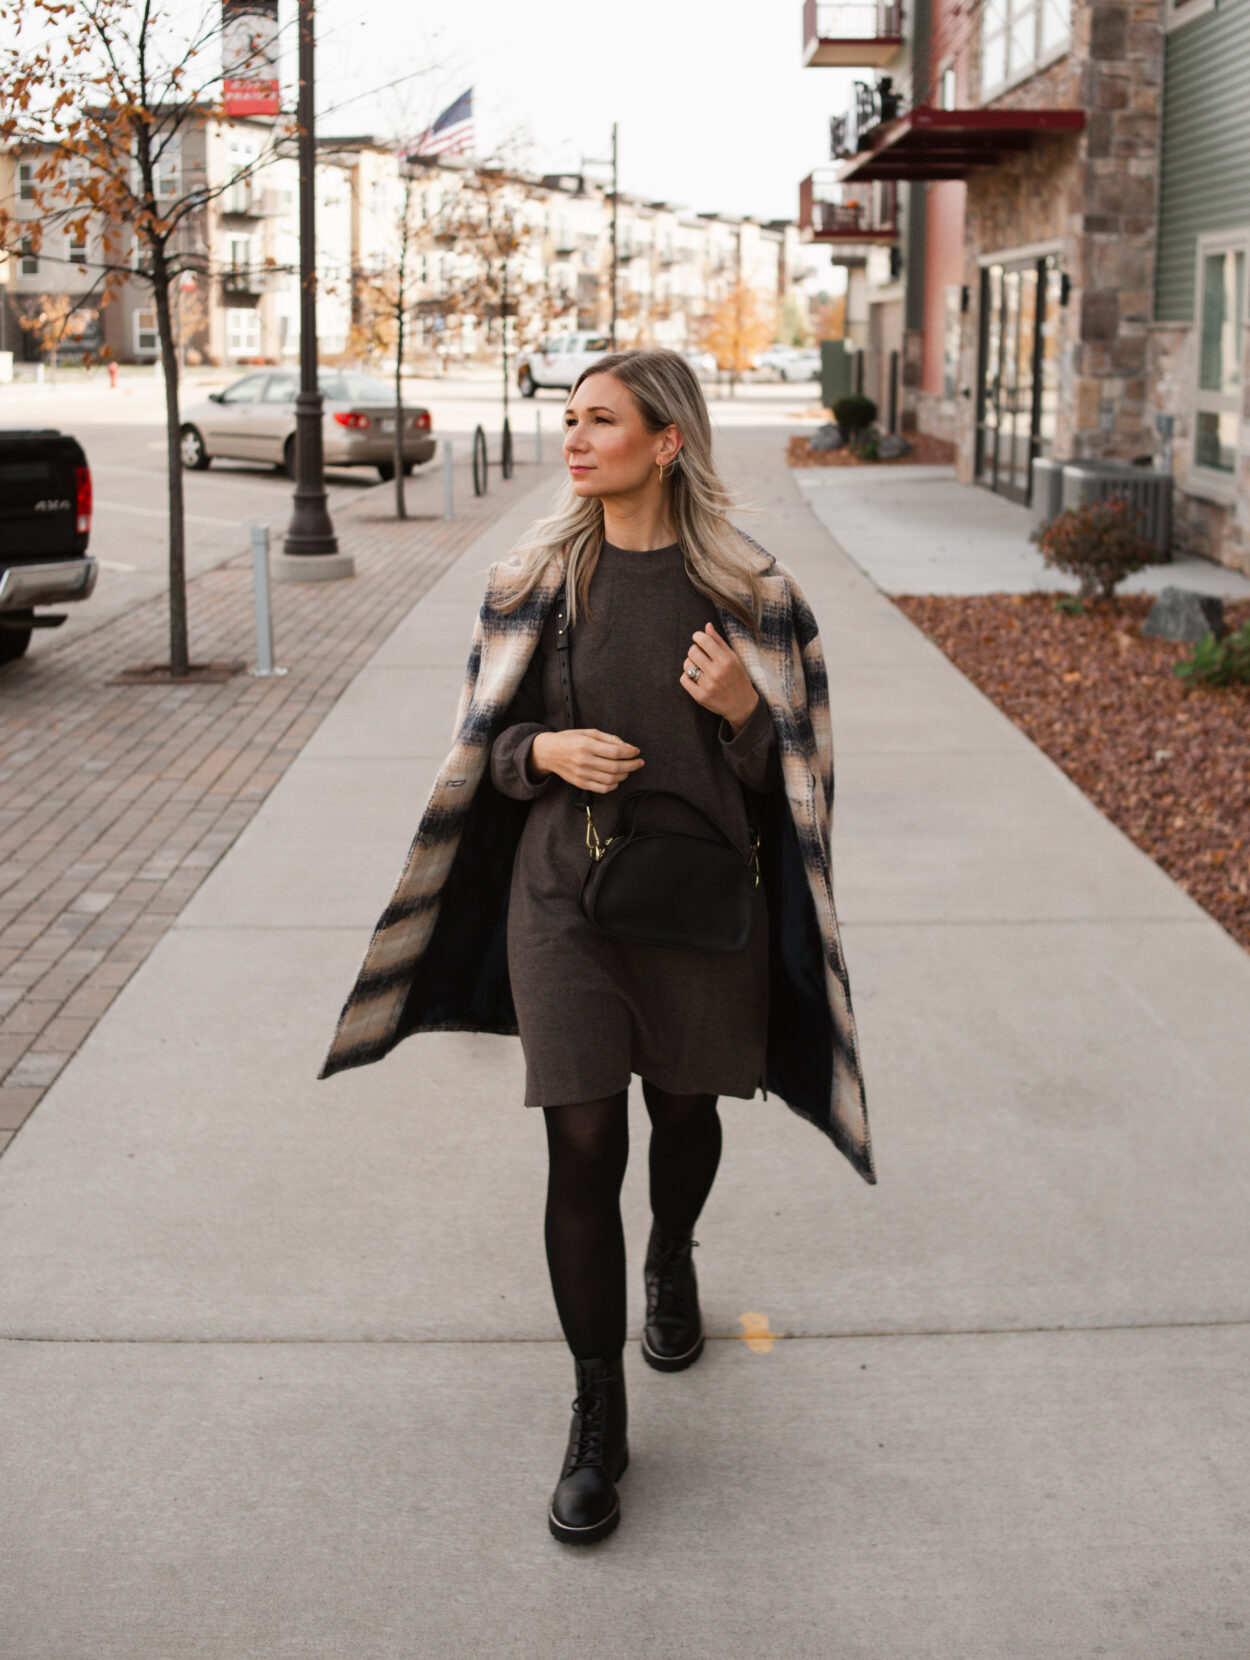 Karin Emily wears a plaid coat and charcoal sweater dress and black combat boots from Madewell